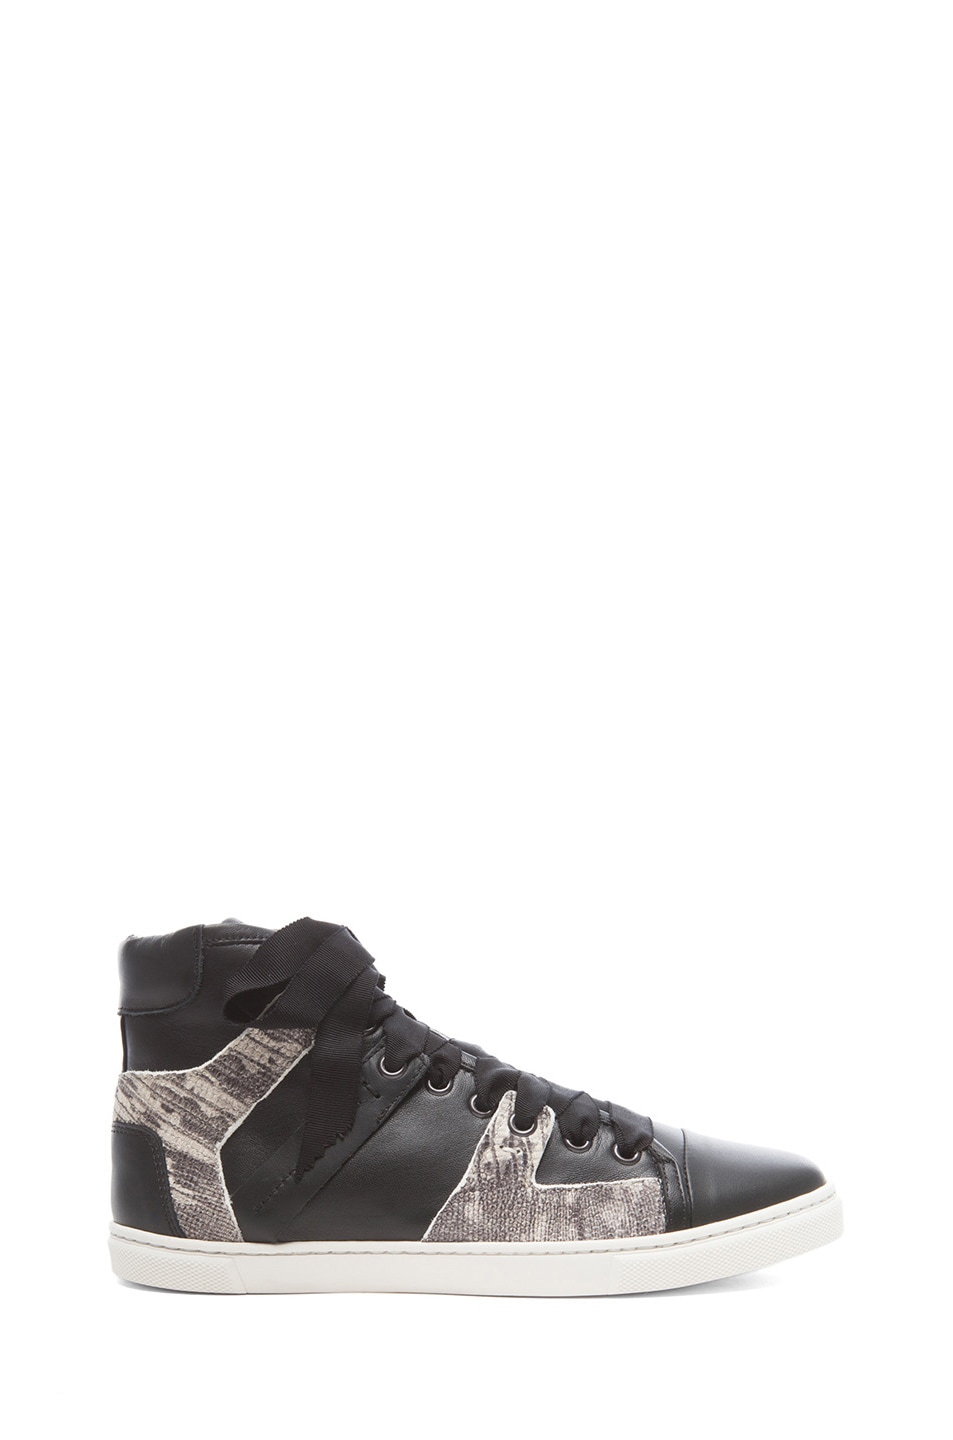 Image 1 of Lanvin High Top Calfskin Leather Sneakers in Black Multi